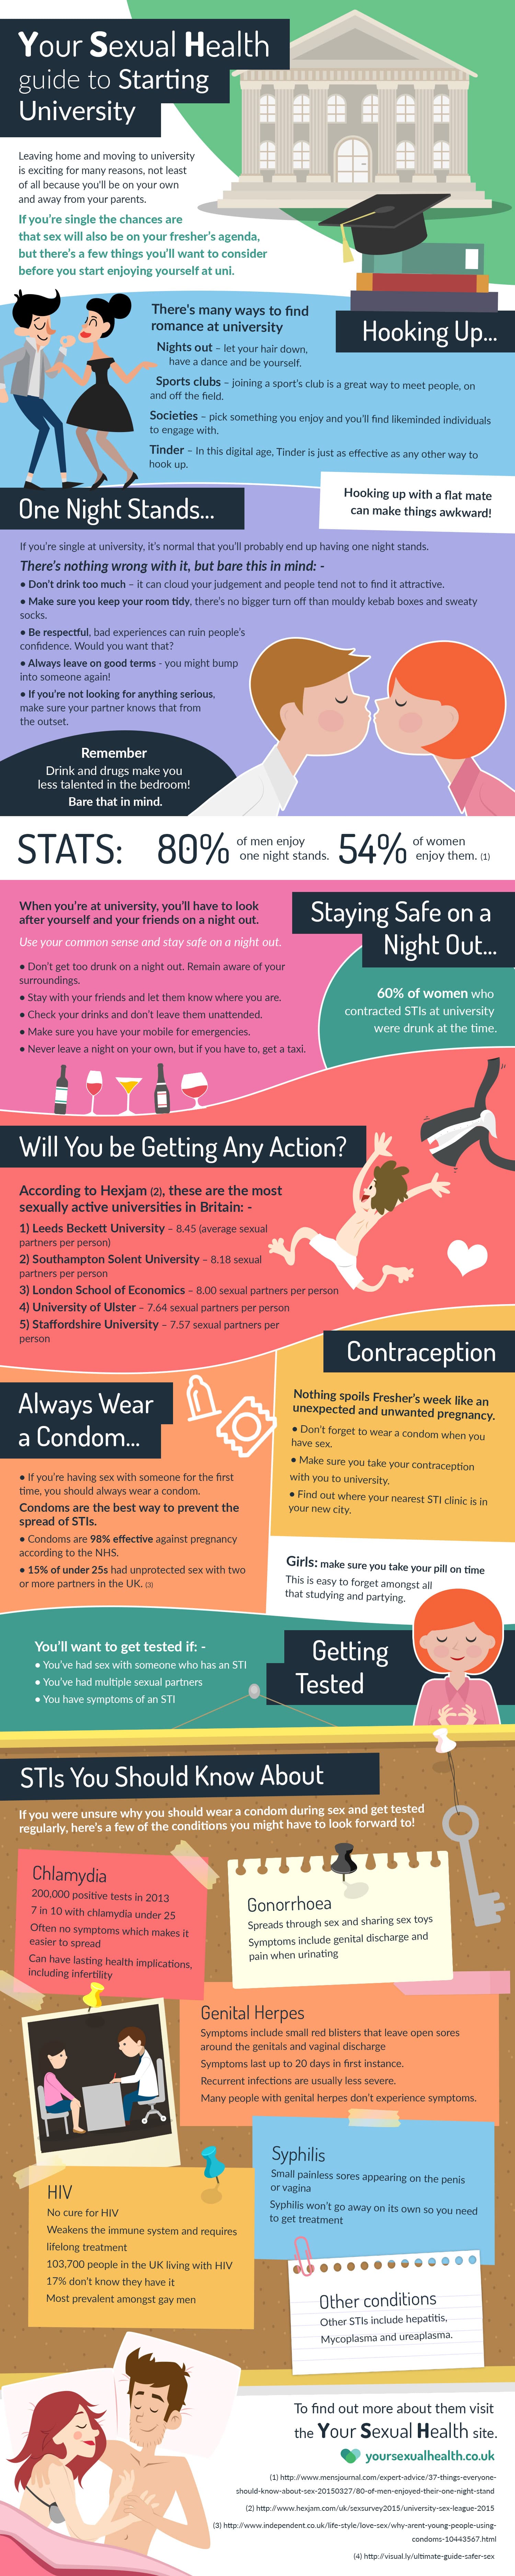 Your Sexual Health Guide to Starting University